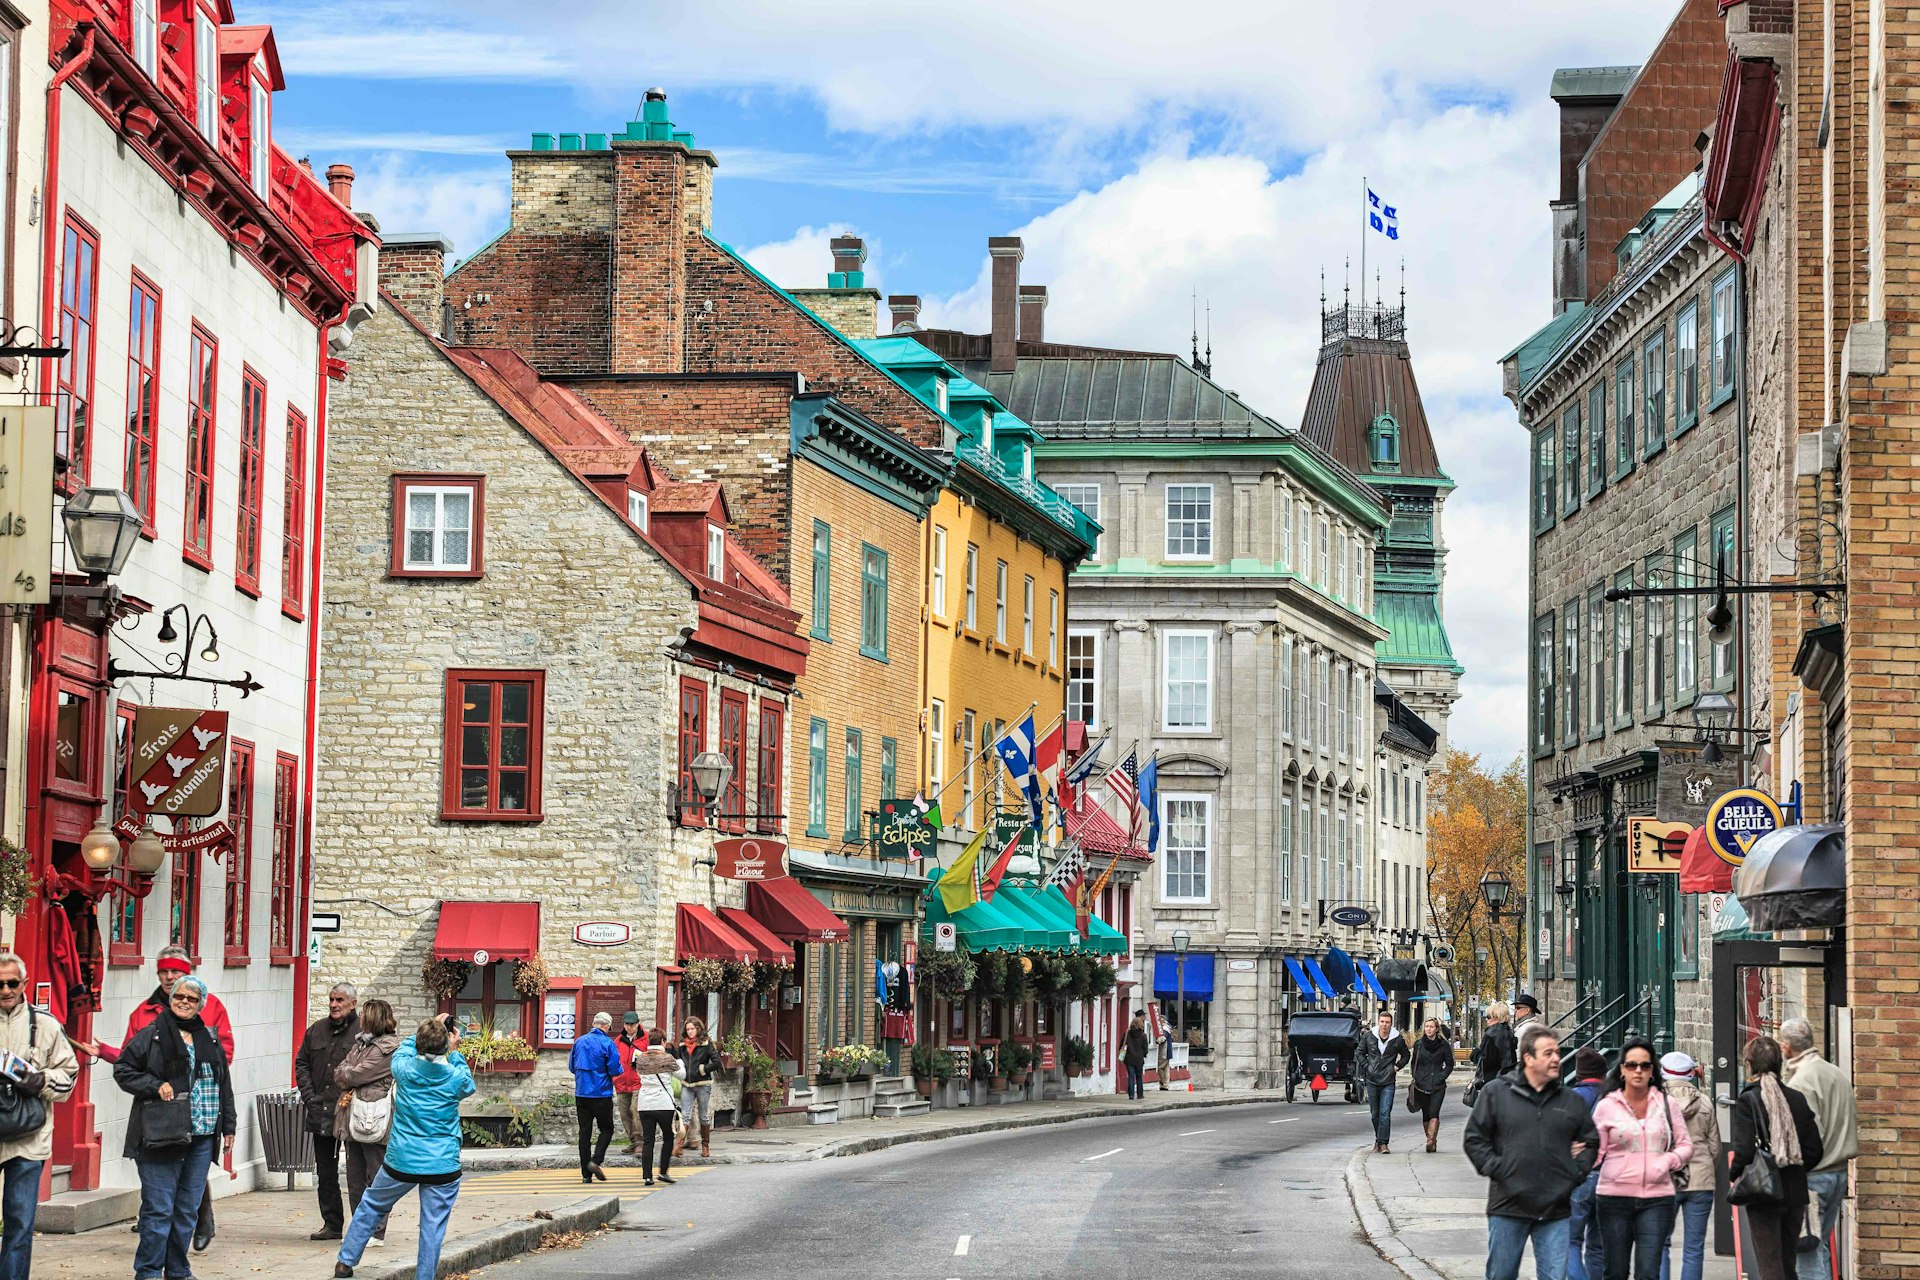 Shoppers and sightseers along Rue Saint-Louis in Old Québec. Image by Ken Gillespie / Getty